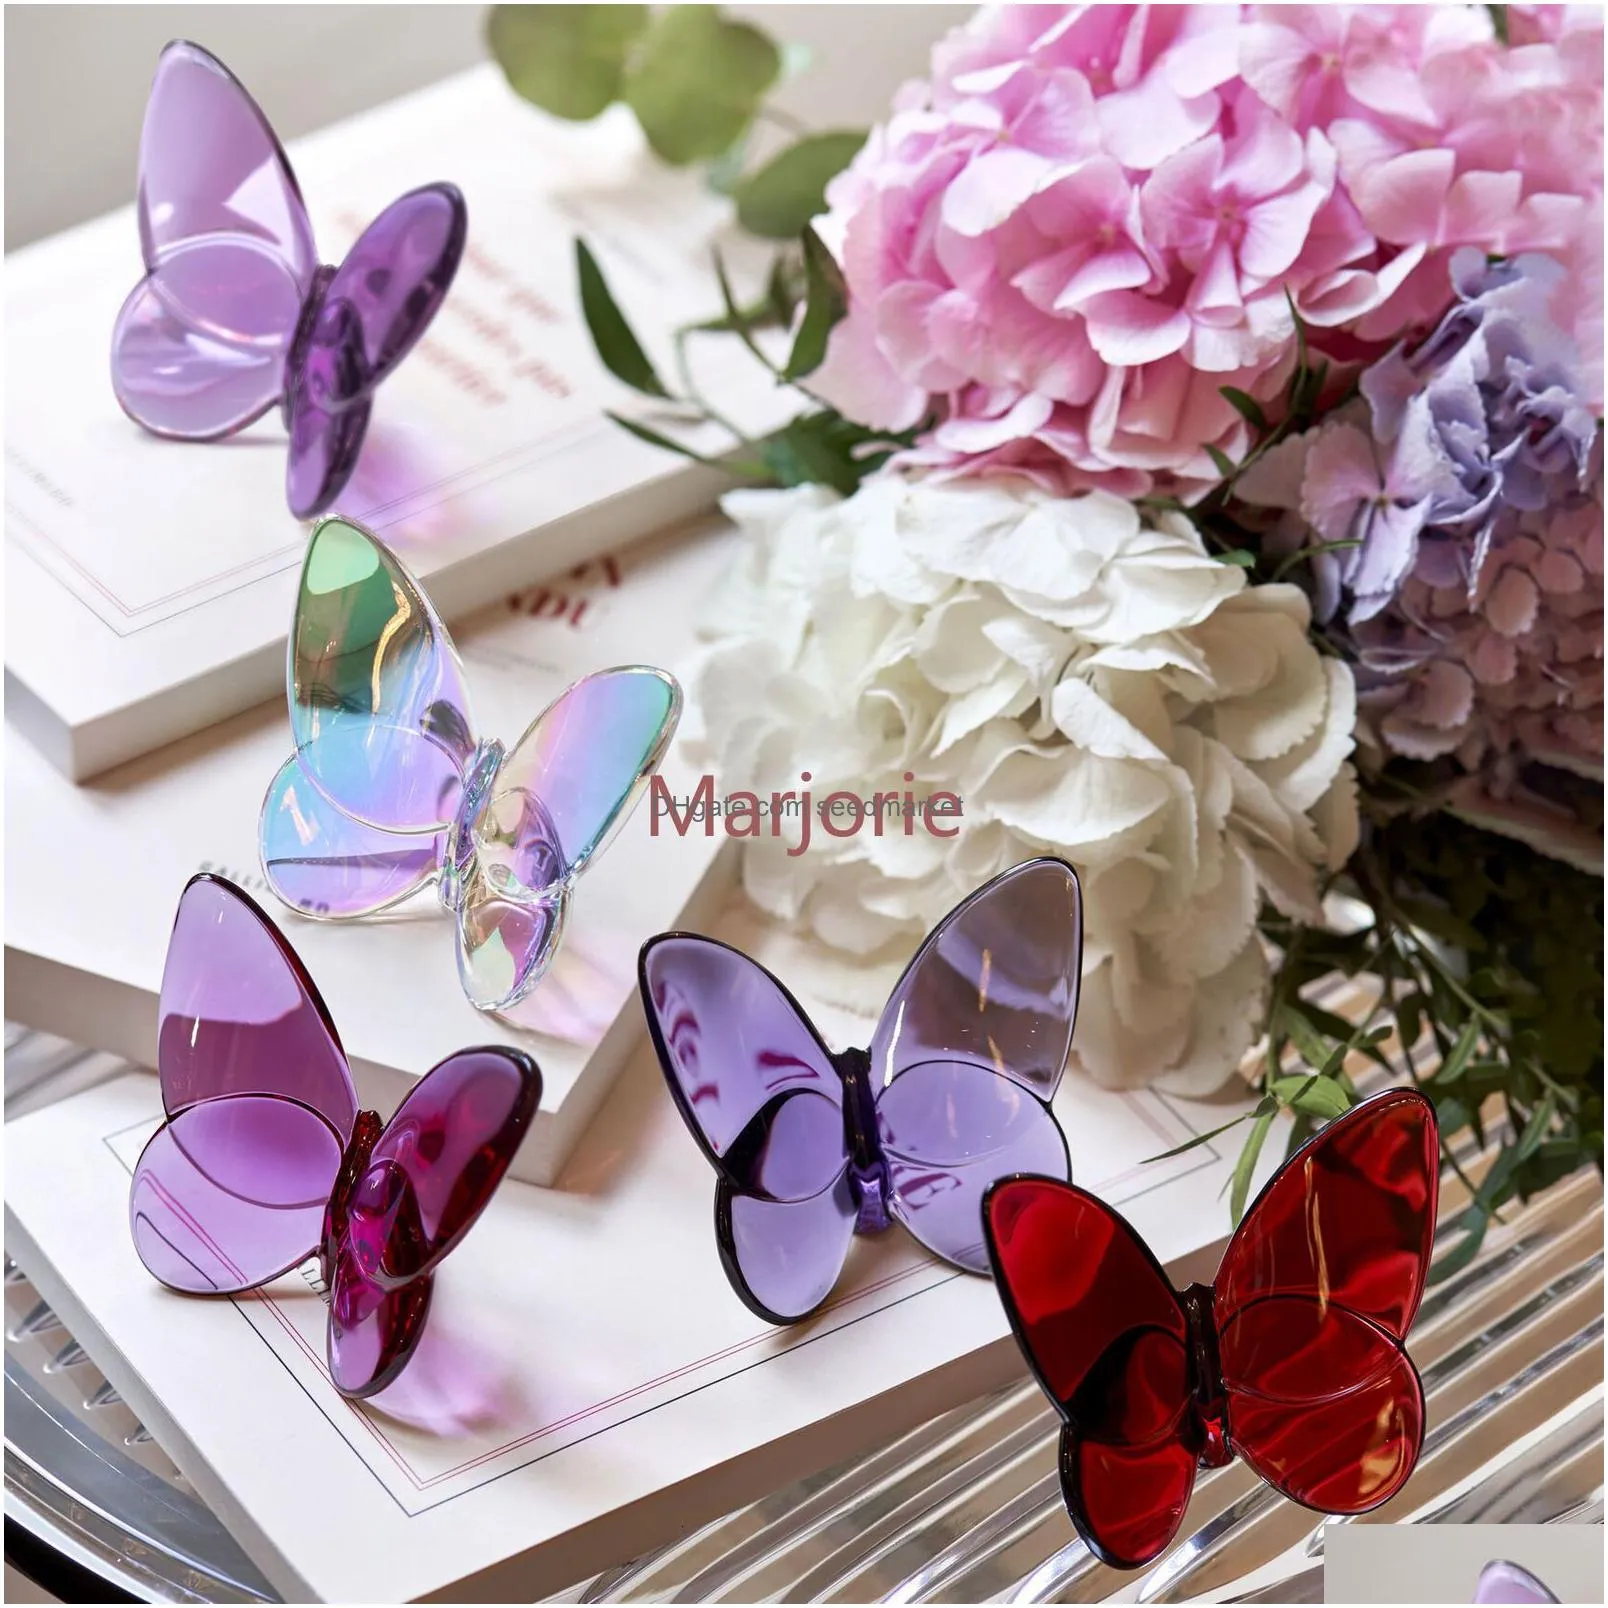 decorative objects figurines colored glaze crystal butterfly ornaments home decoration crafts holiday party gifts 230530